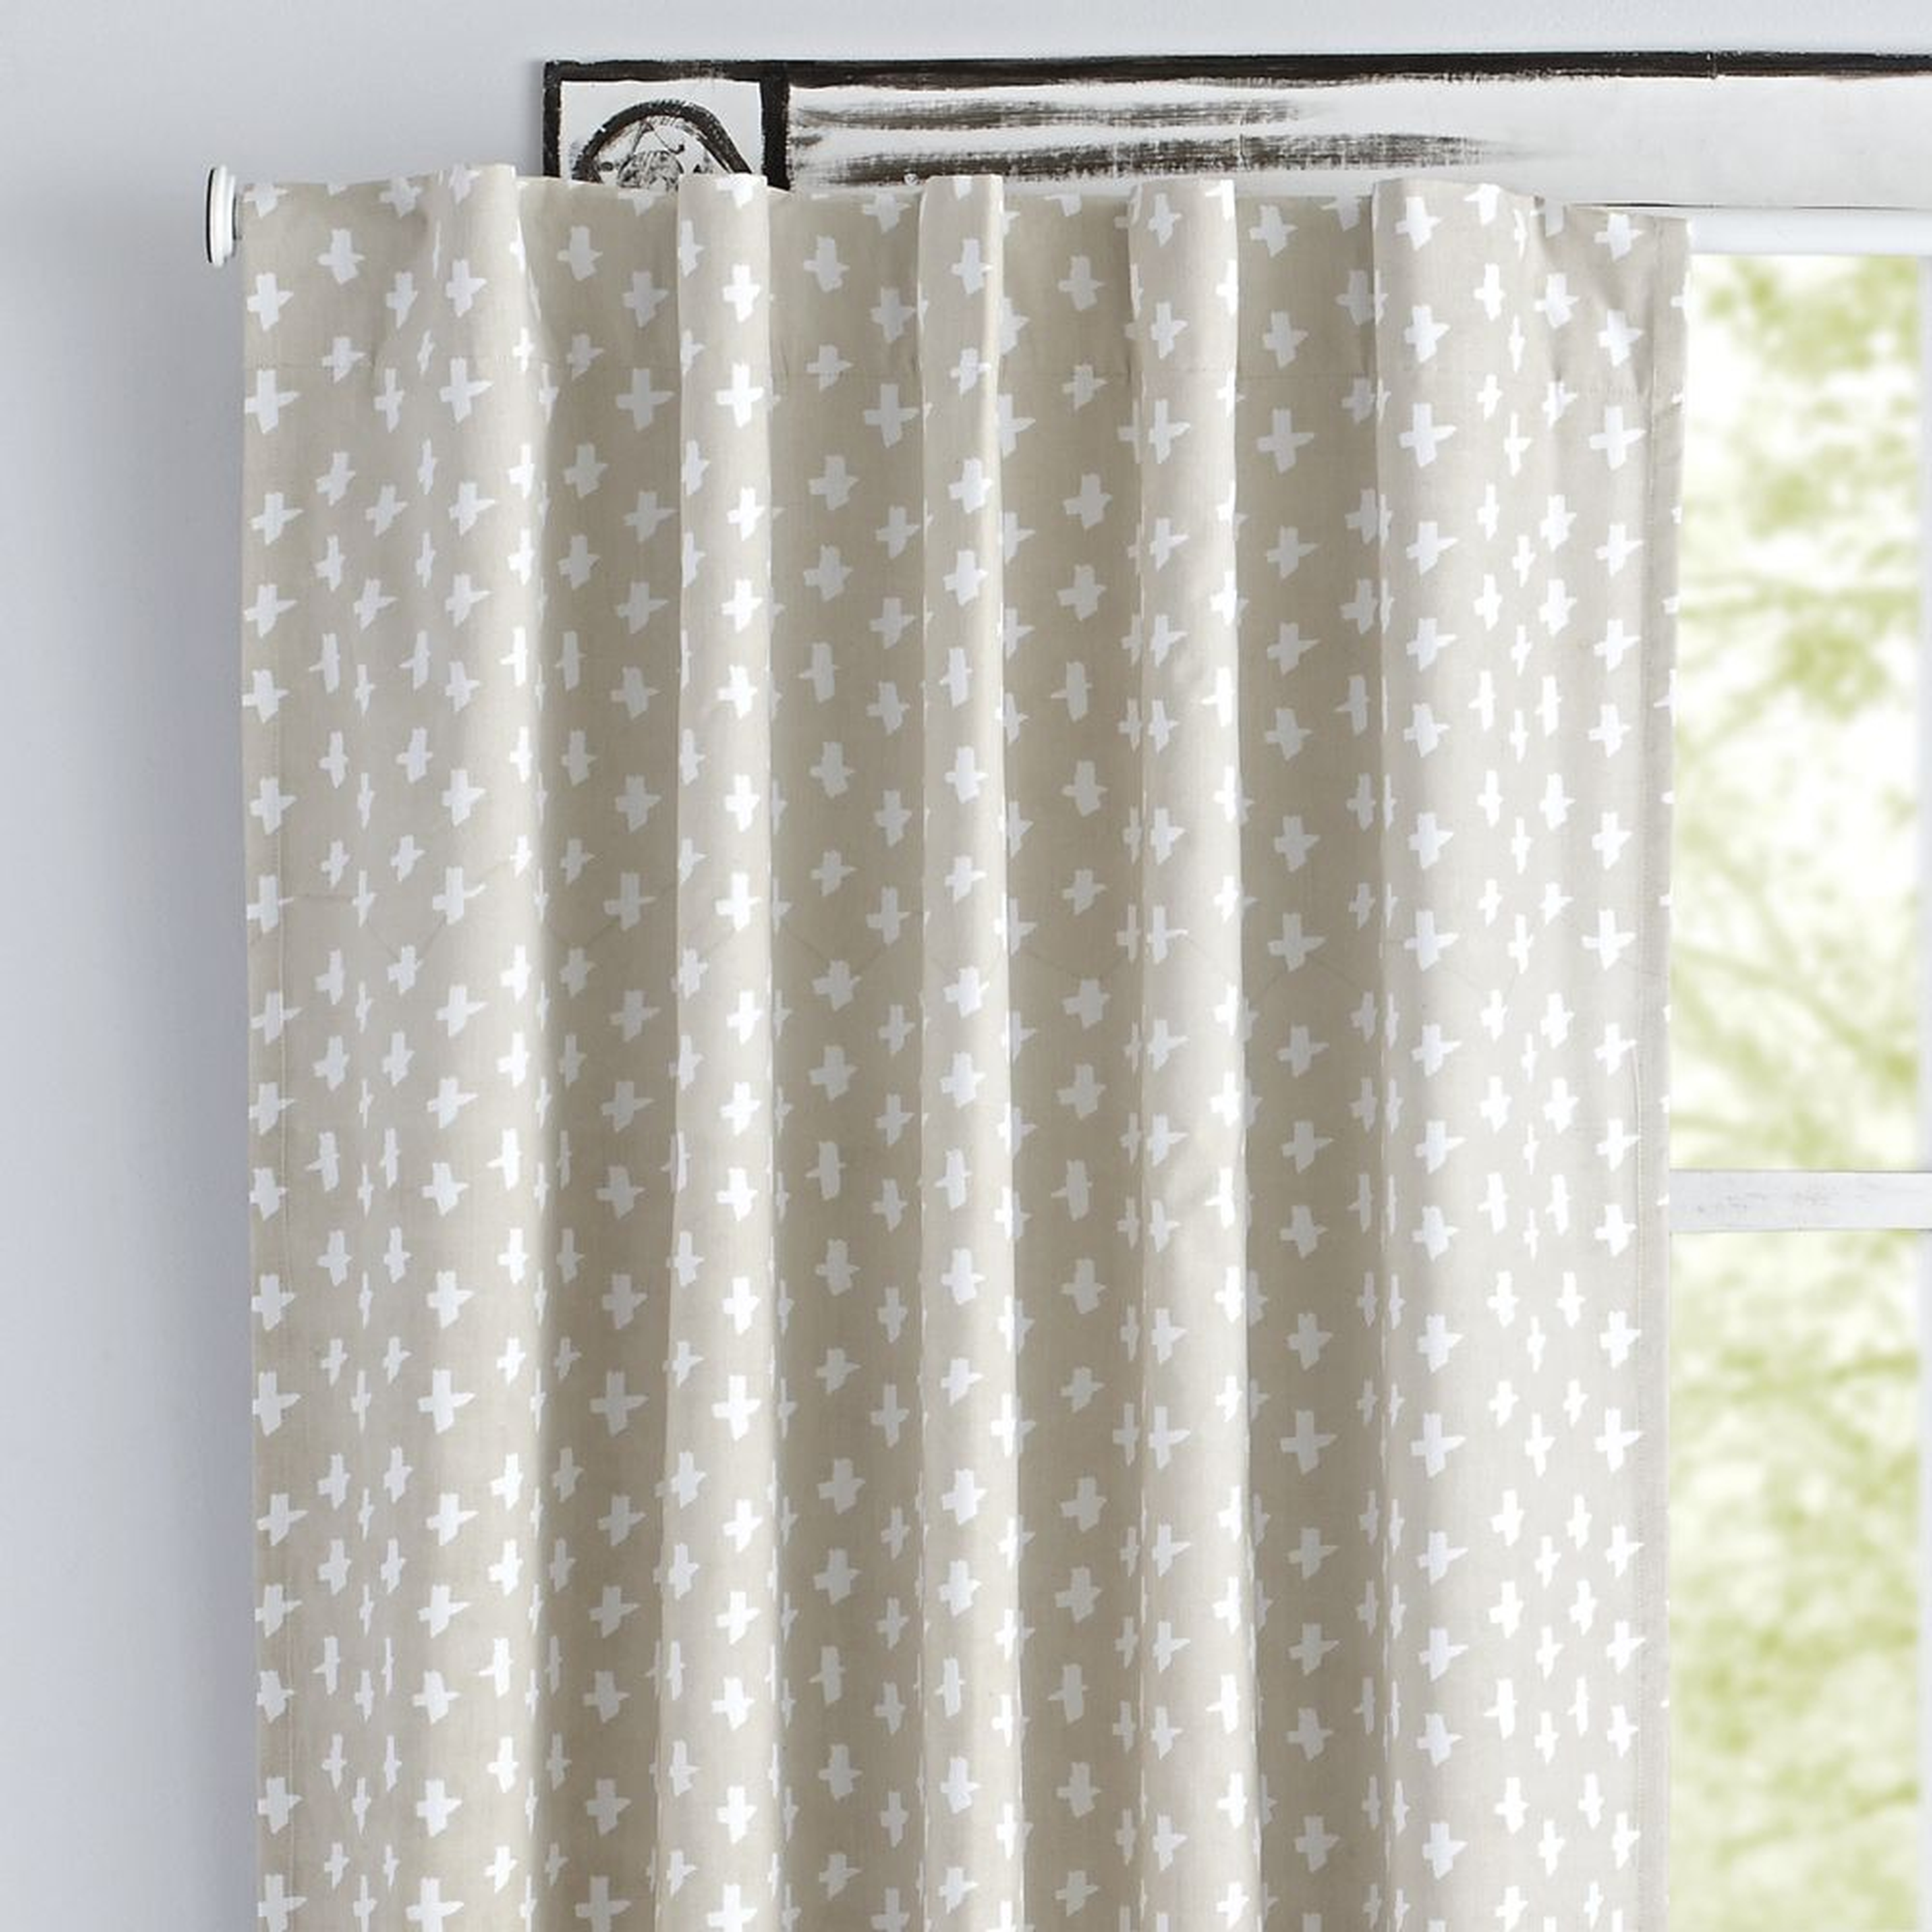 Freehand 84" Beige Blackout Curtain - Crate and Barrel